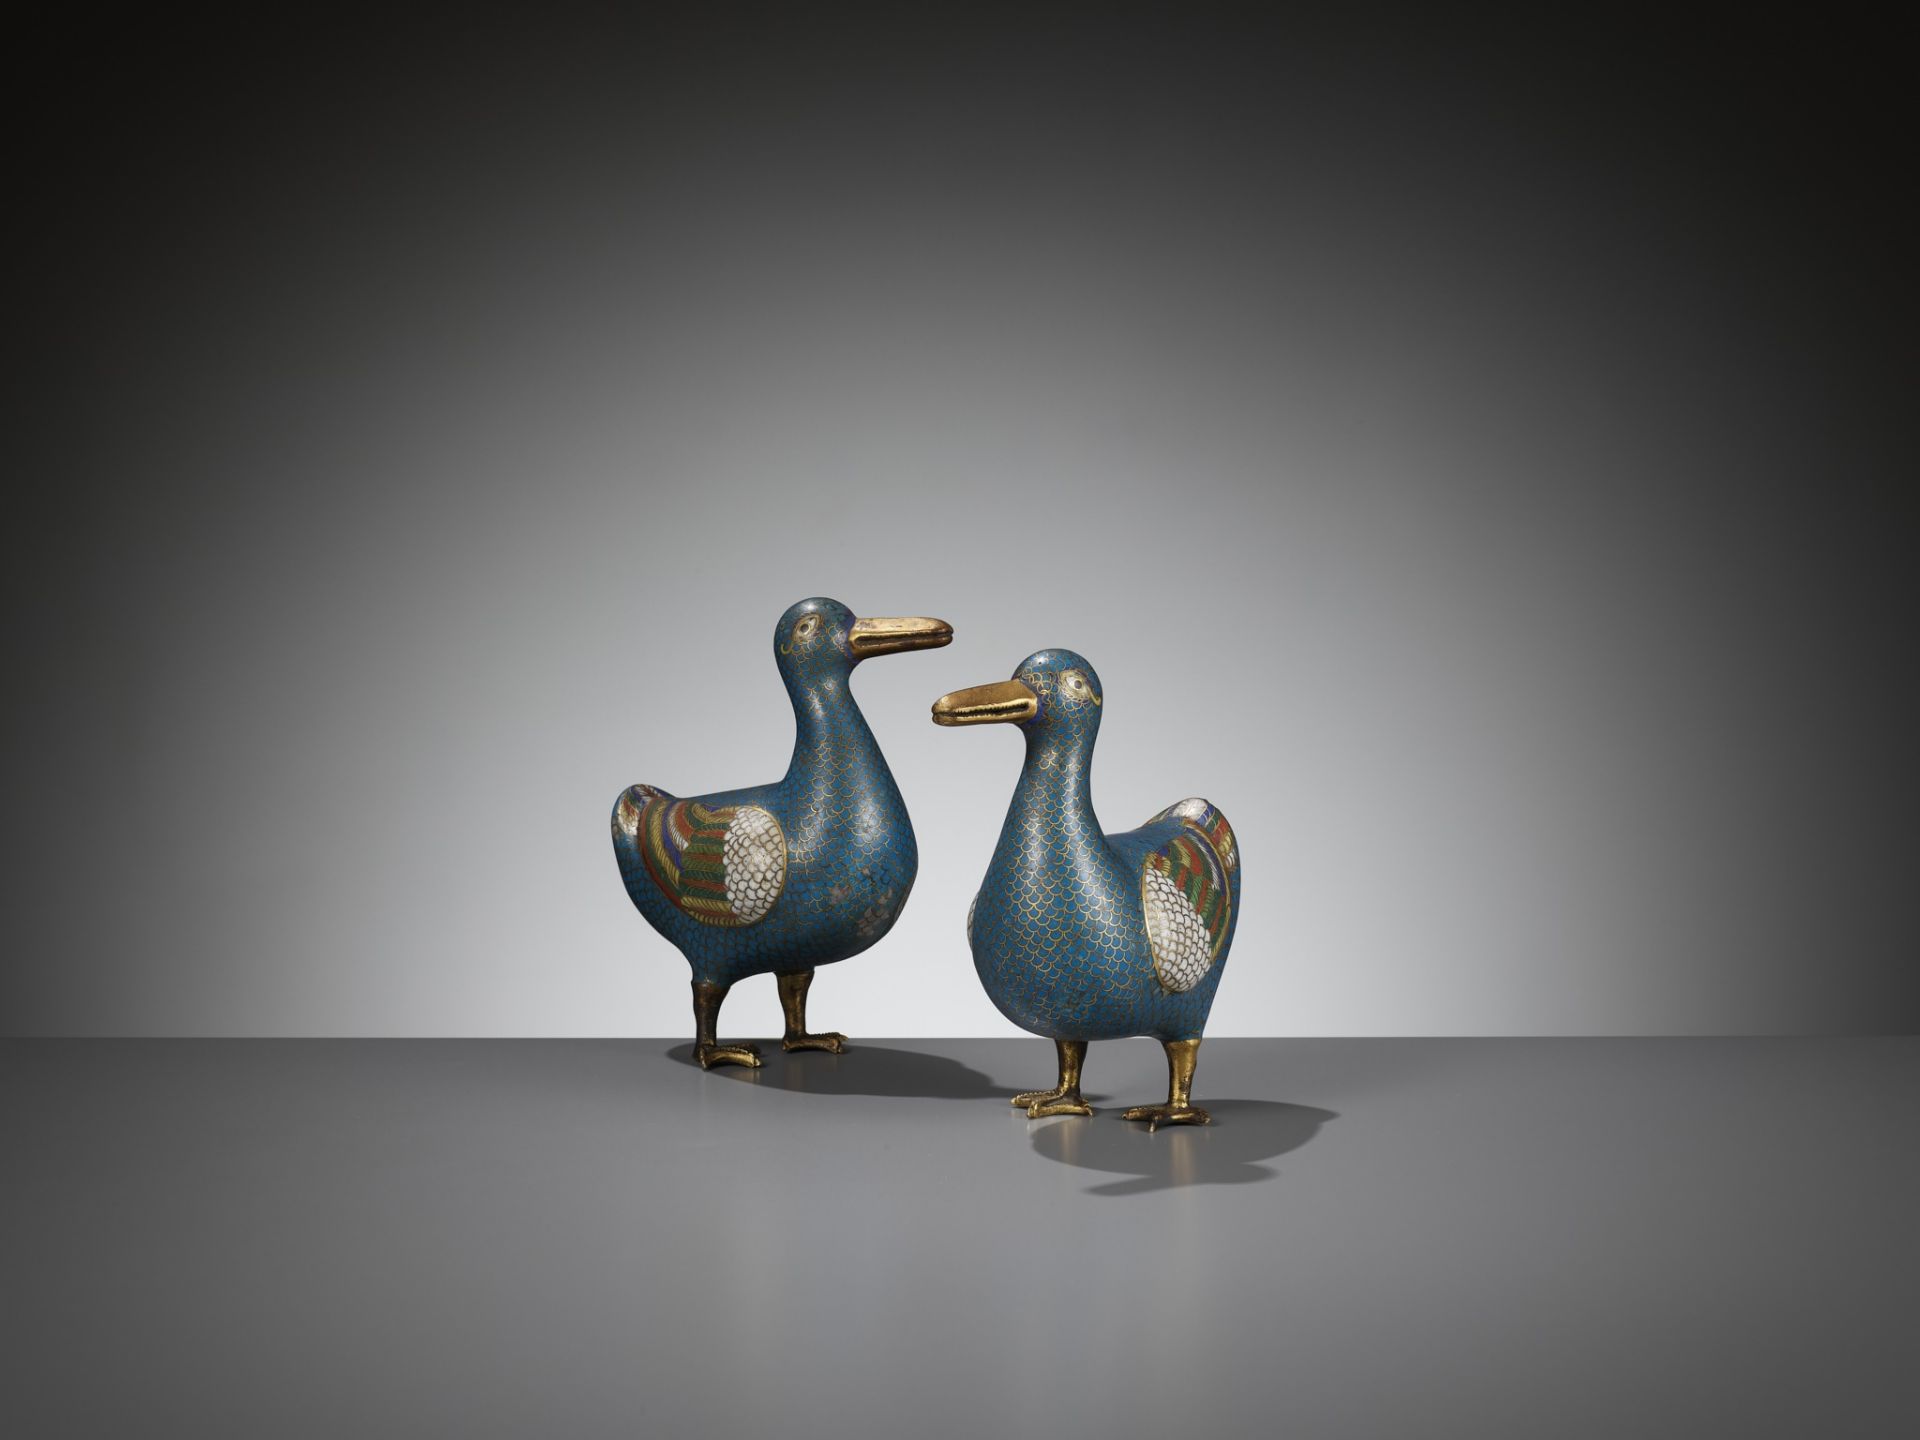 A PAIR OF CLOISONNE ENAMEL FIGURES OF DUCKS, QING DYNASTY - Image 6 of 8